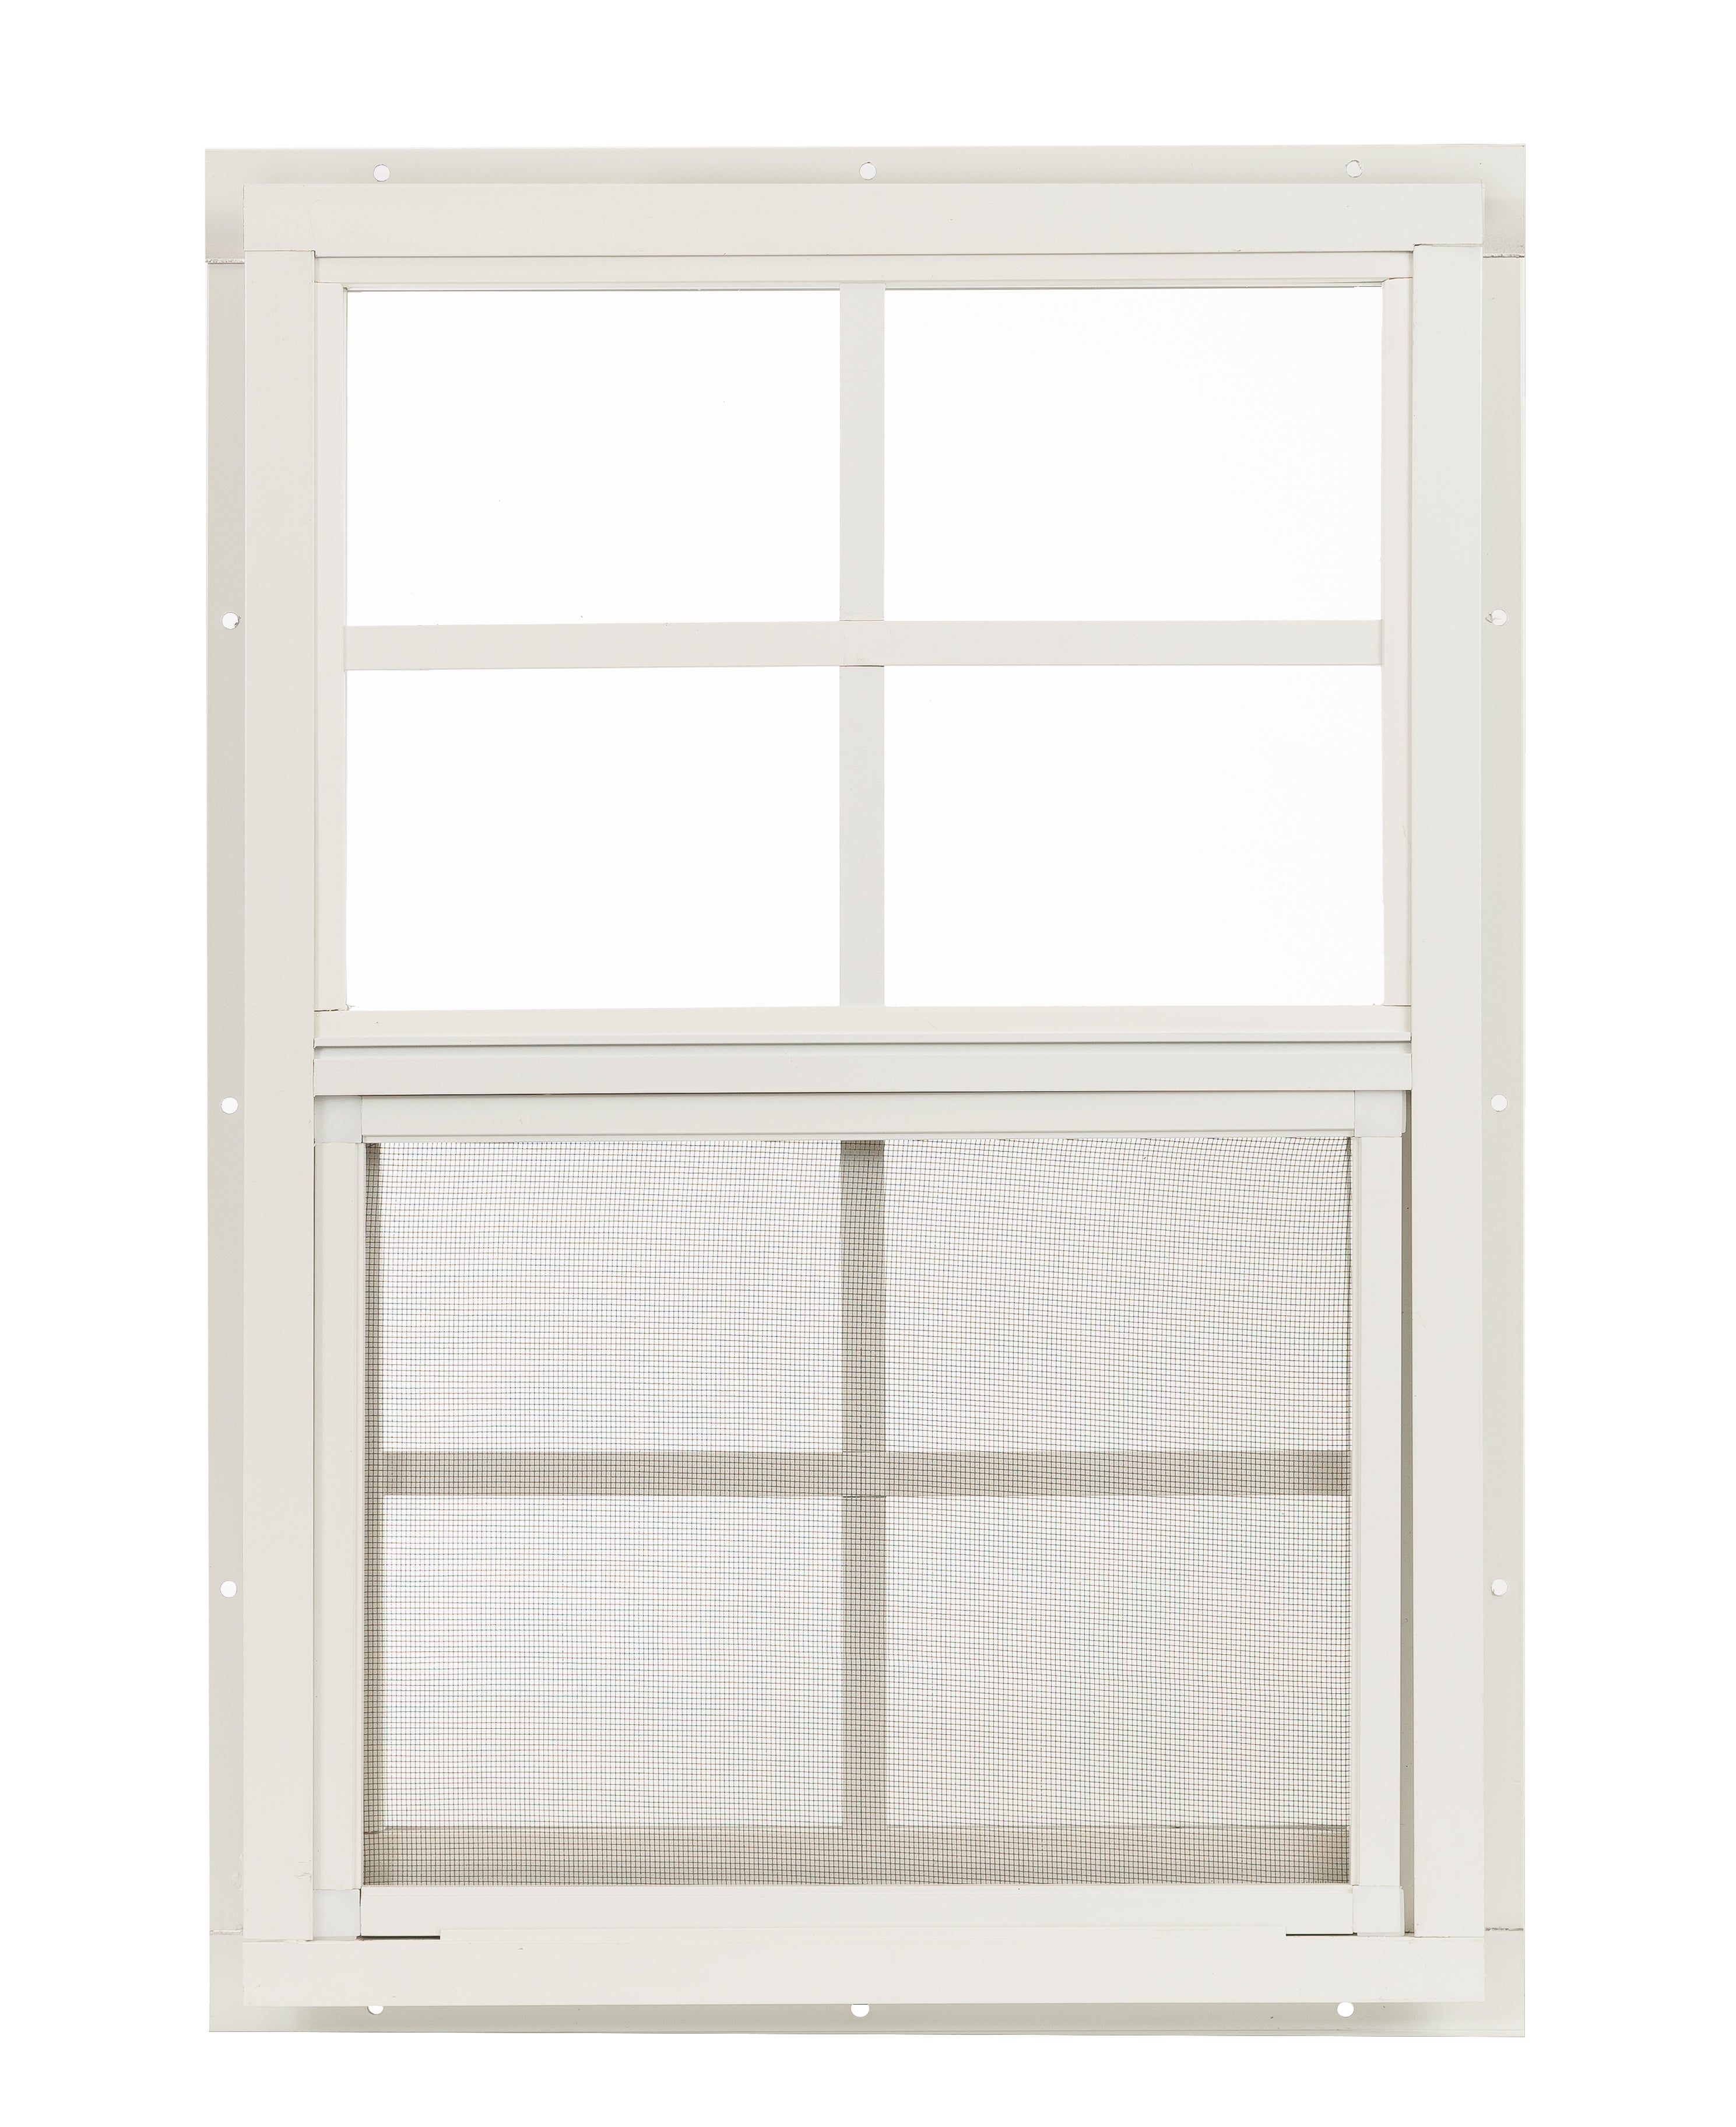 14" W x 21" H Single Hung J-Lap Mount White Window for Sheds, Playhouses, and MORE